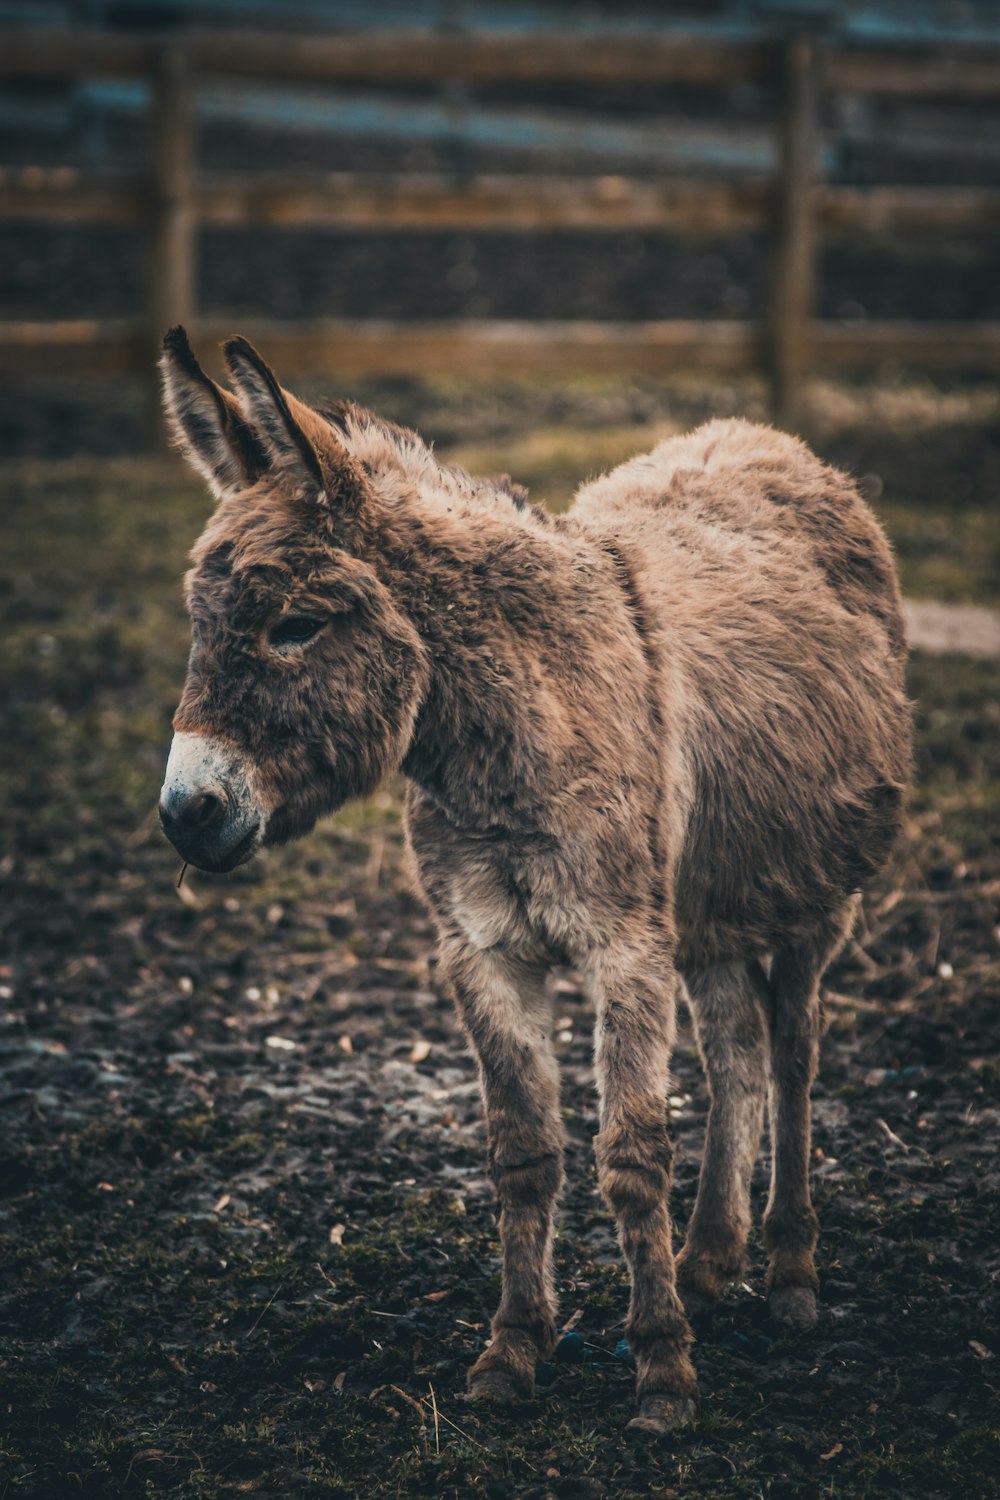 a small brown donkey standing on top of a dirt field